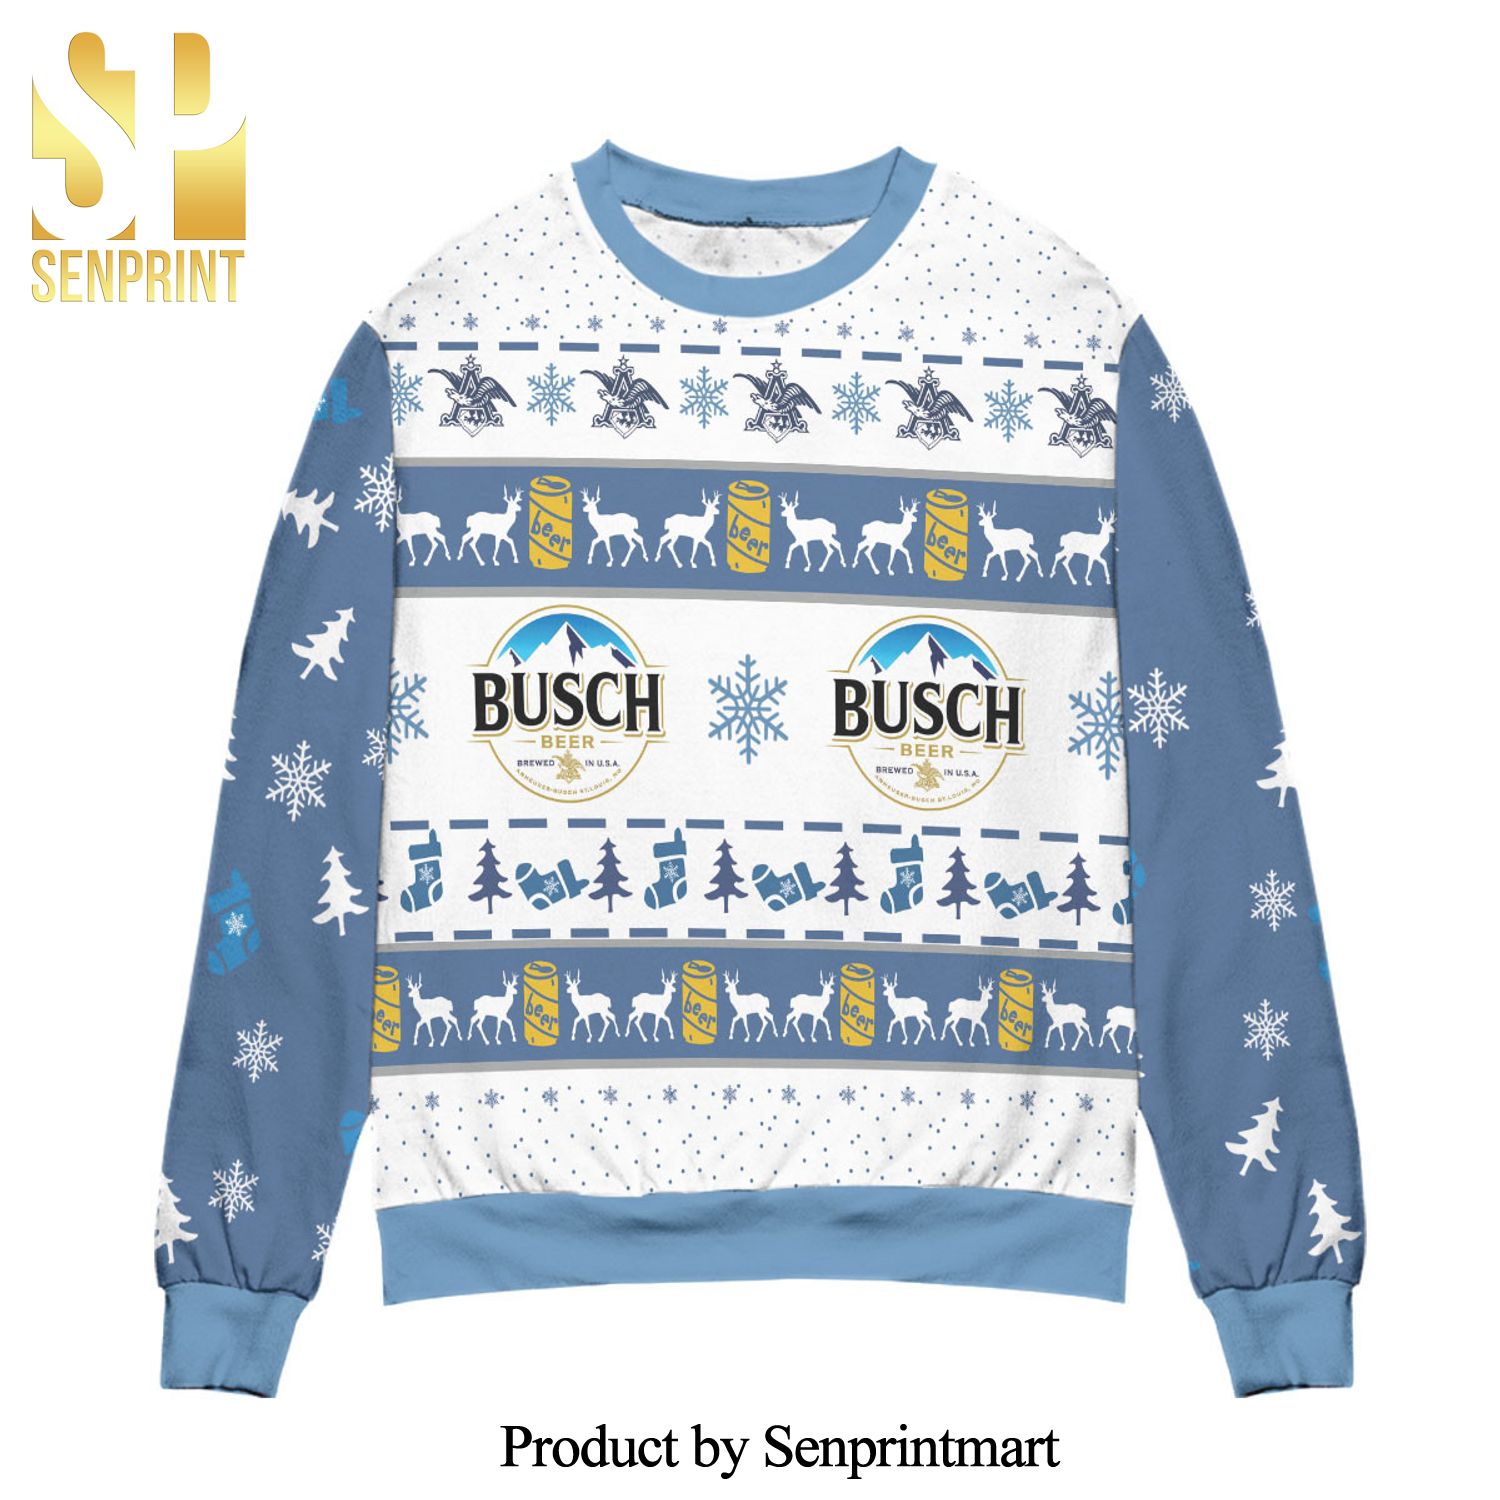 Busch Beer Snowflake And Socks Pattern Knitted Ugly Christmas Sweater – Blue White